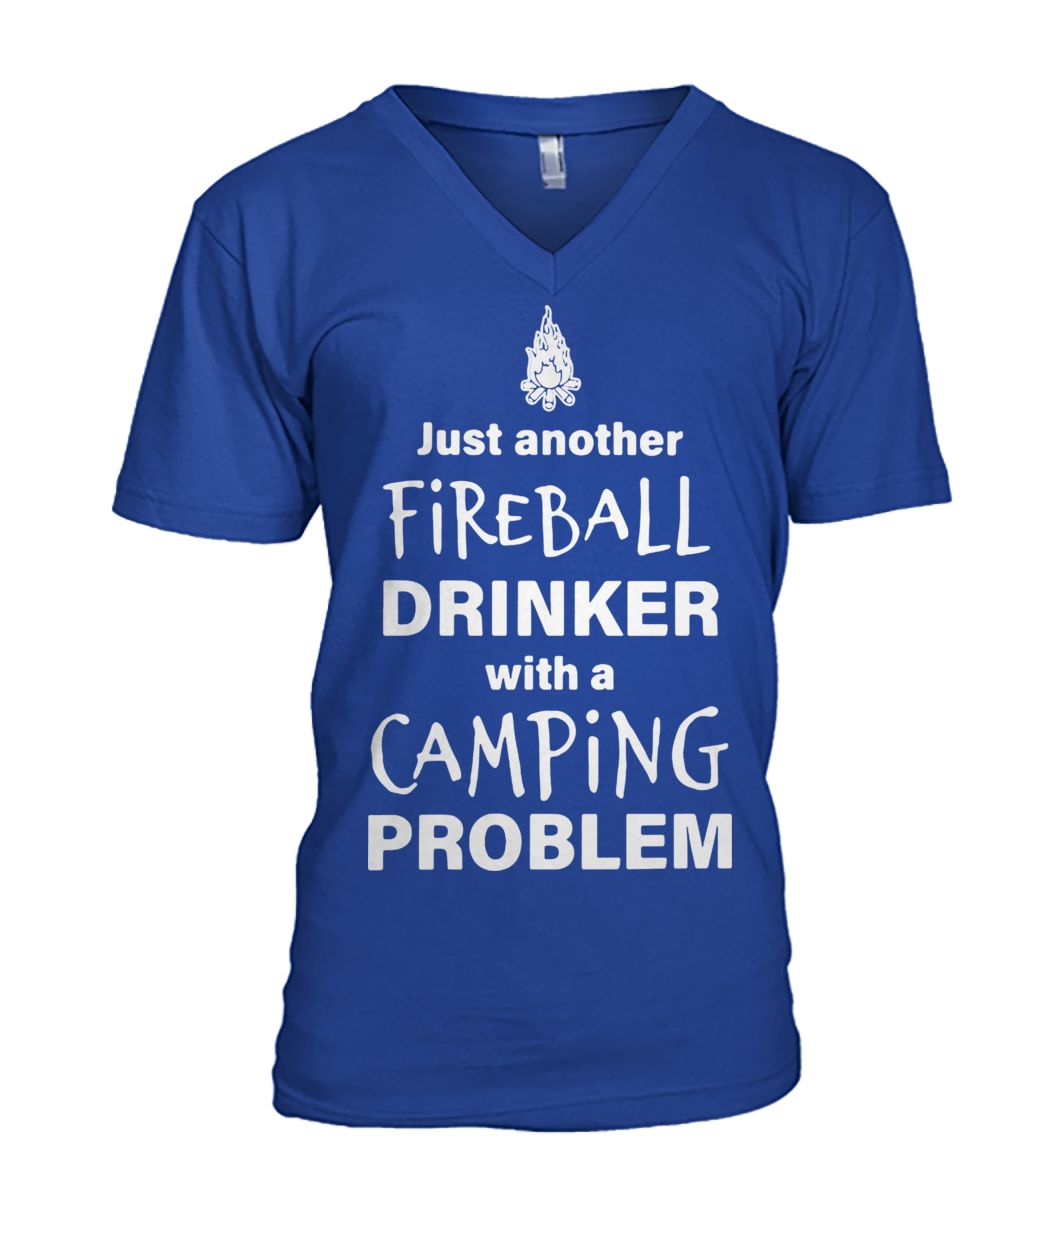 Just another fireball drinker with a camping problem mens v-neck